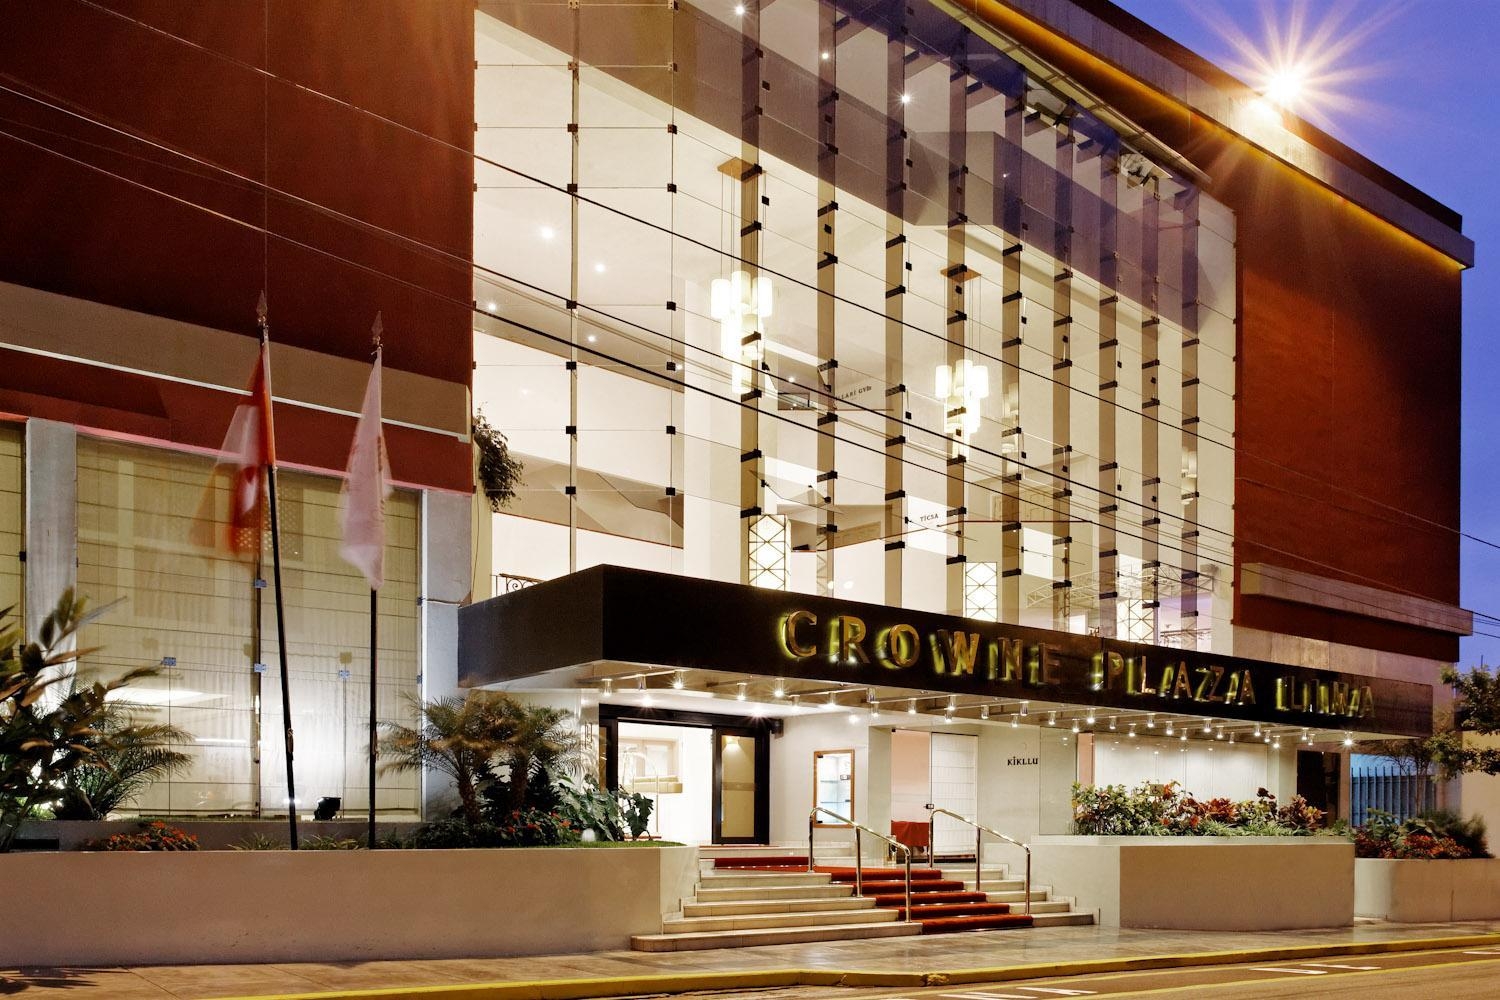 Hotel Crowne Plaza LIMA - Lima - Great prices at HOTEL INFO